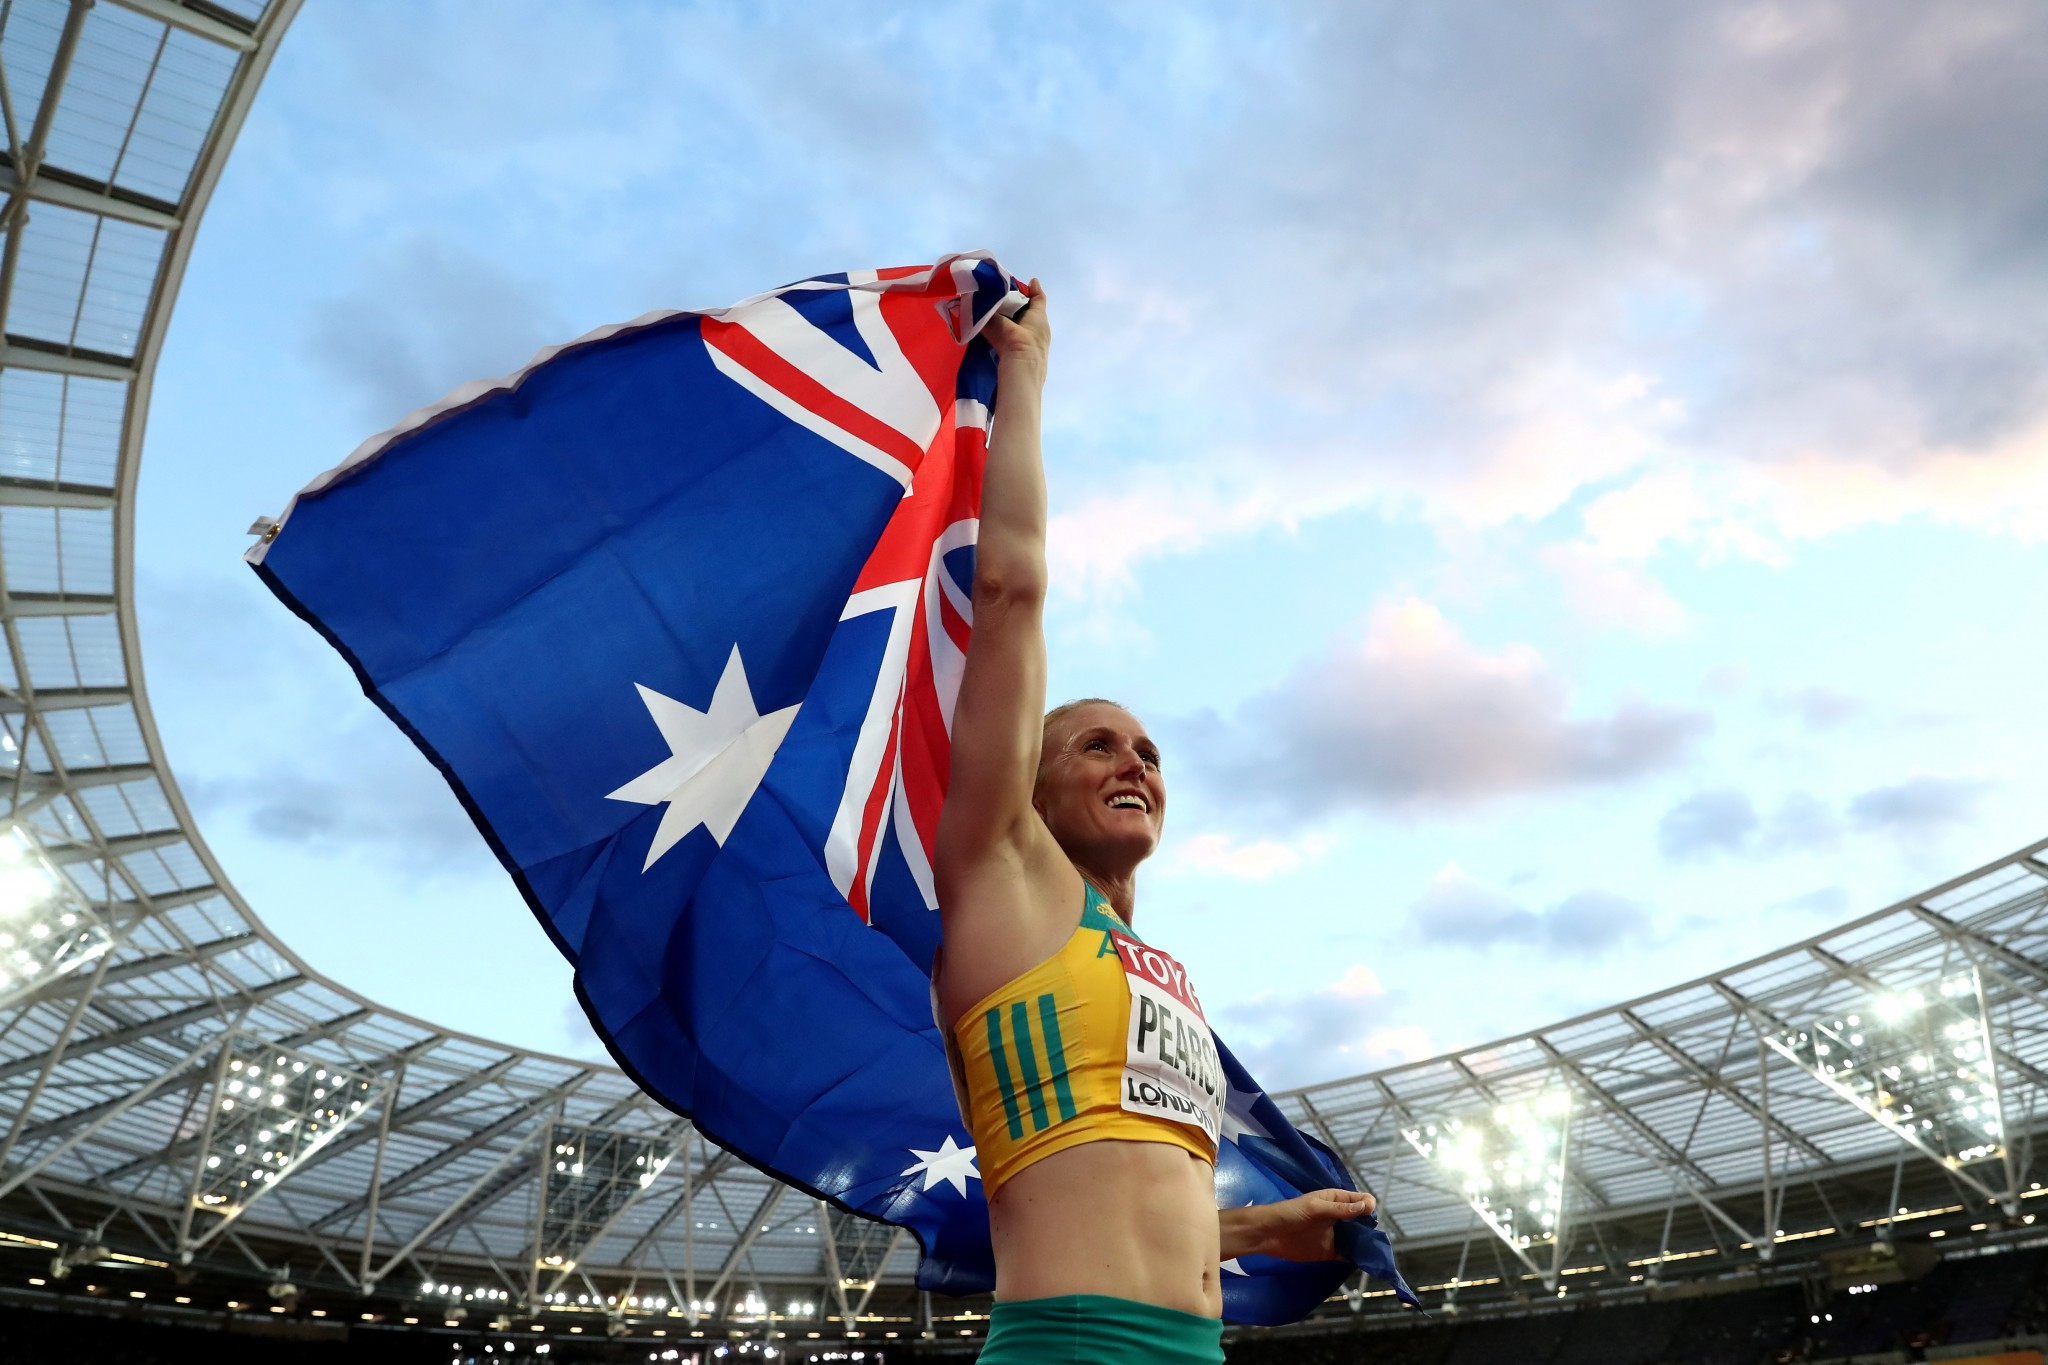 Sally Pearson, a former two-time winner, has been nominated again  ©Getty Images